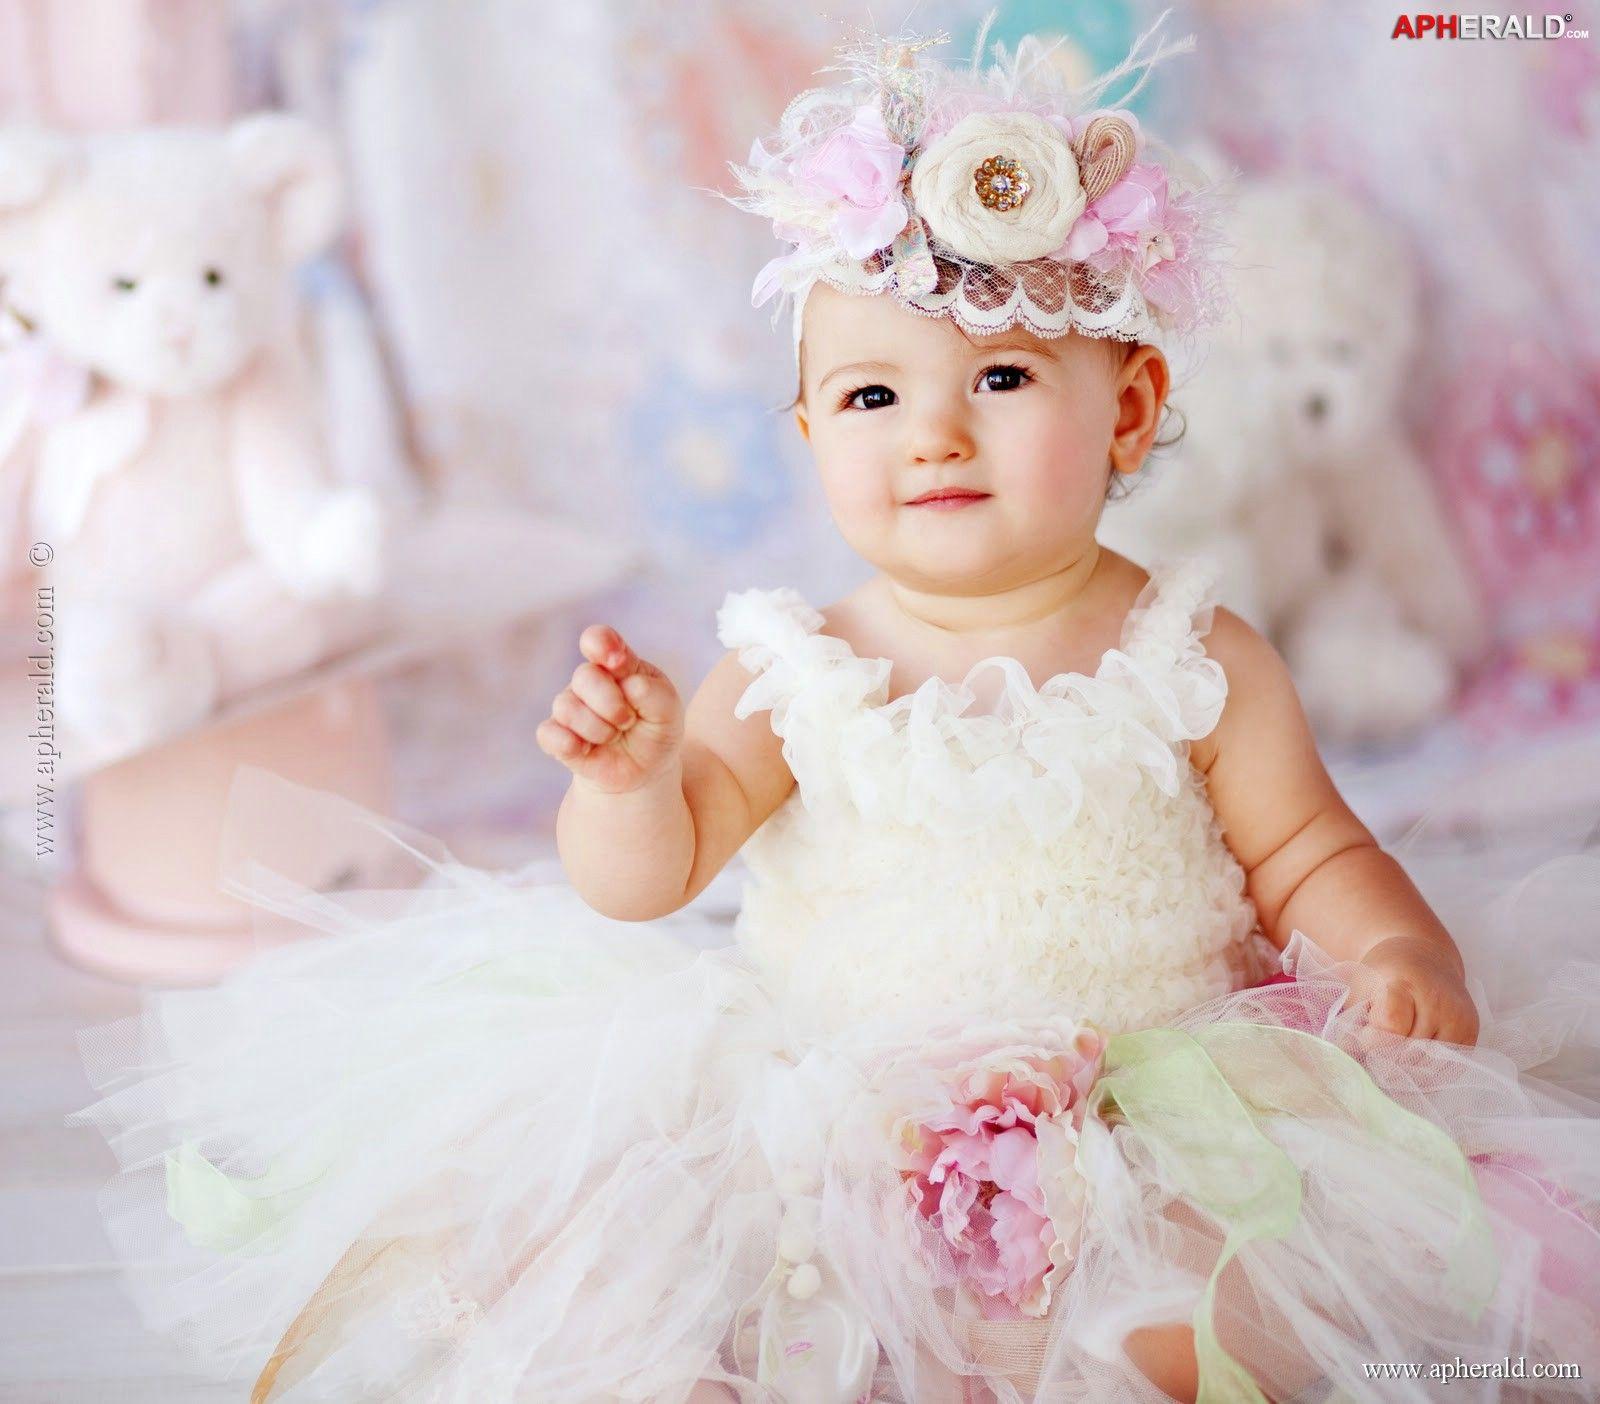 Wallpapers Cute Baby Girl First Hd On Girls Pictures High Quality